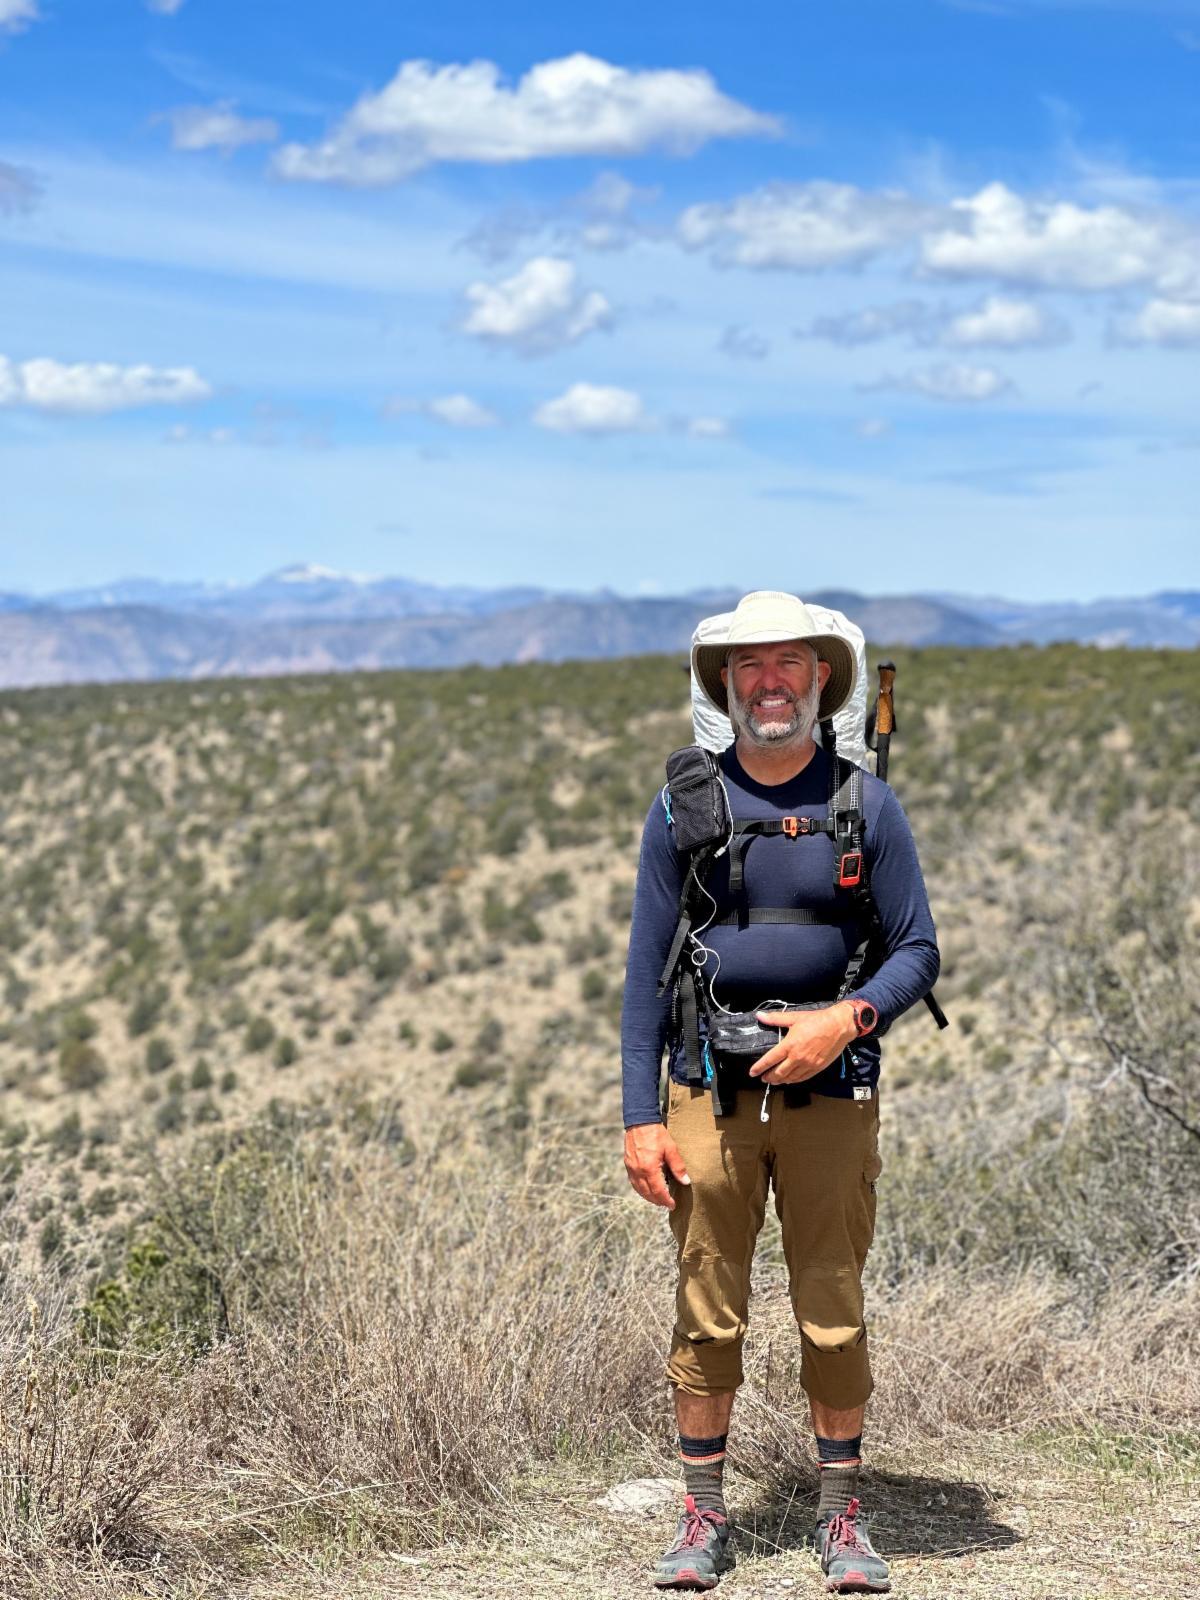 Tom in the Gila National Forest and the Gila Cliff Dwellings.